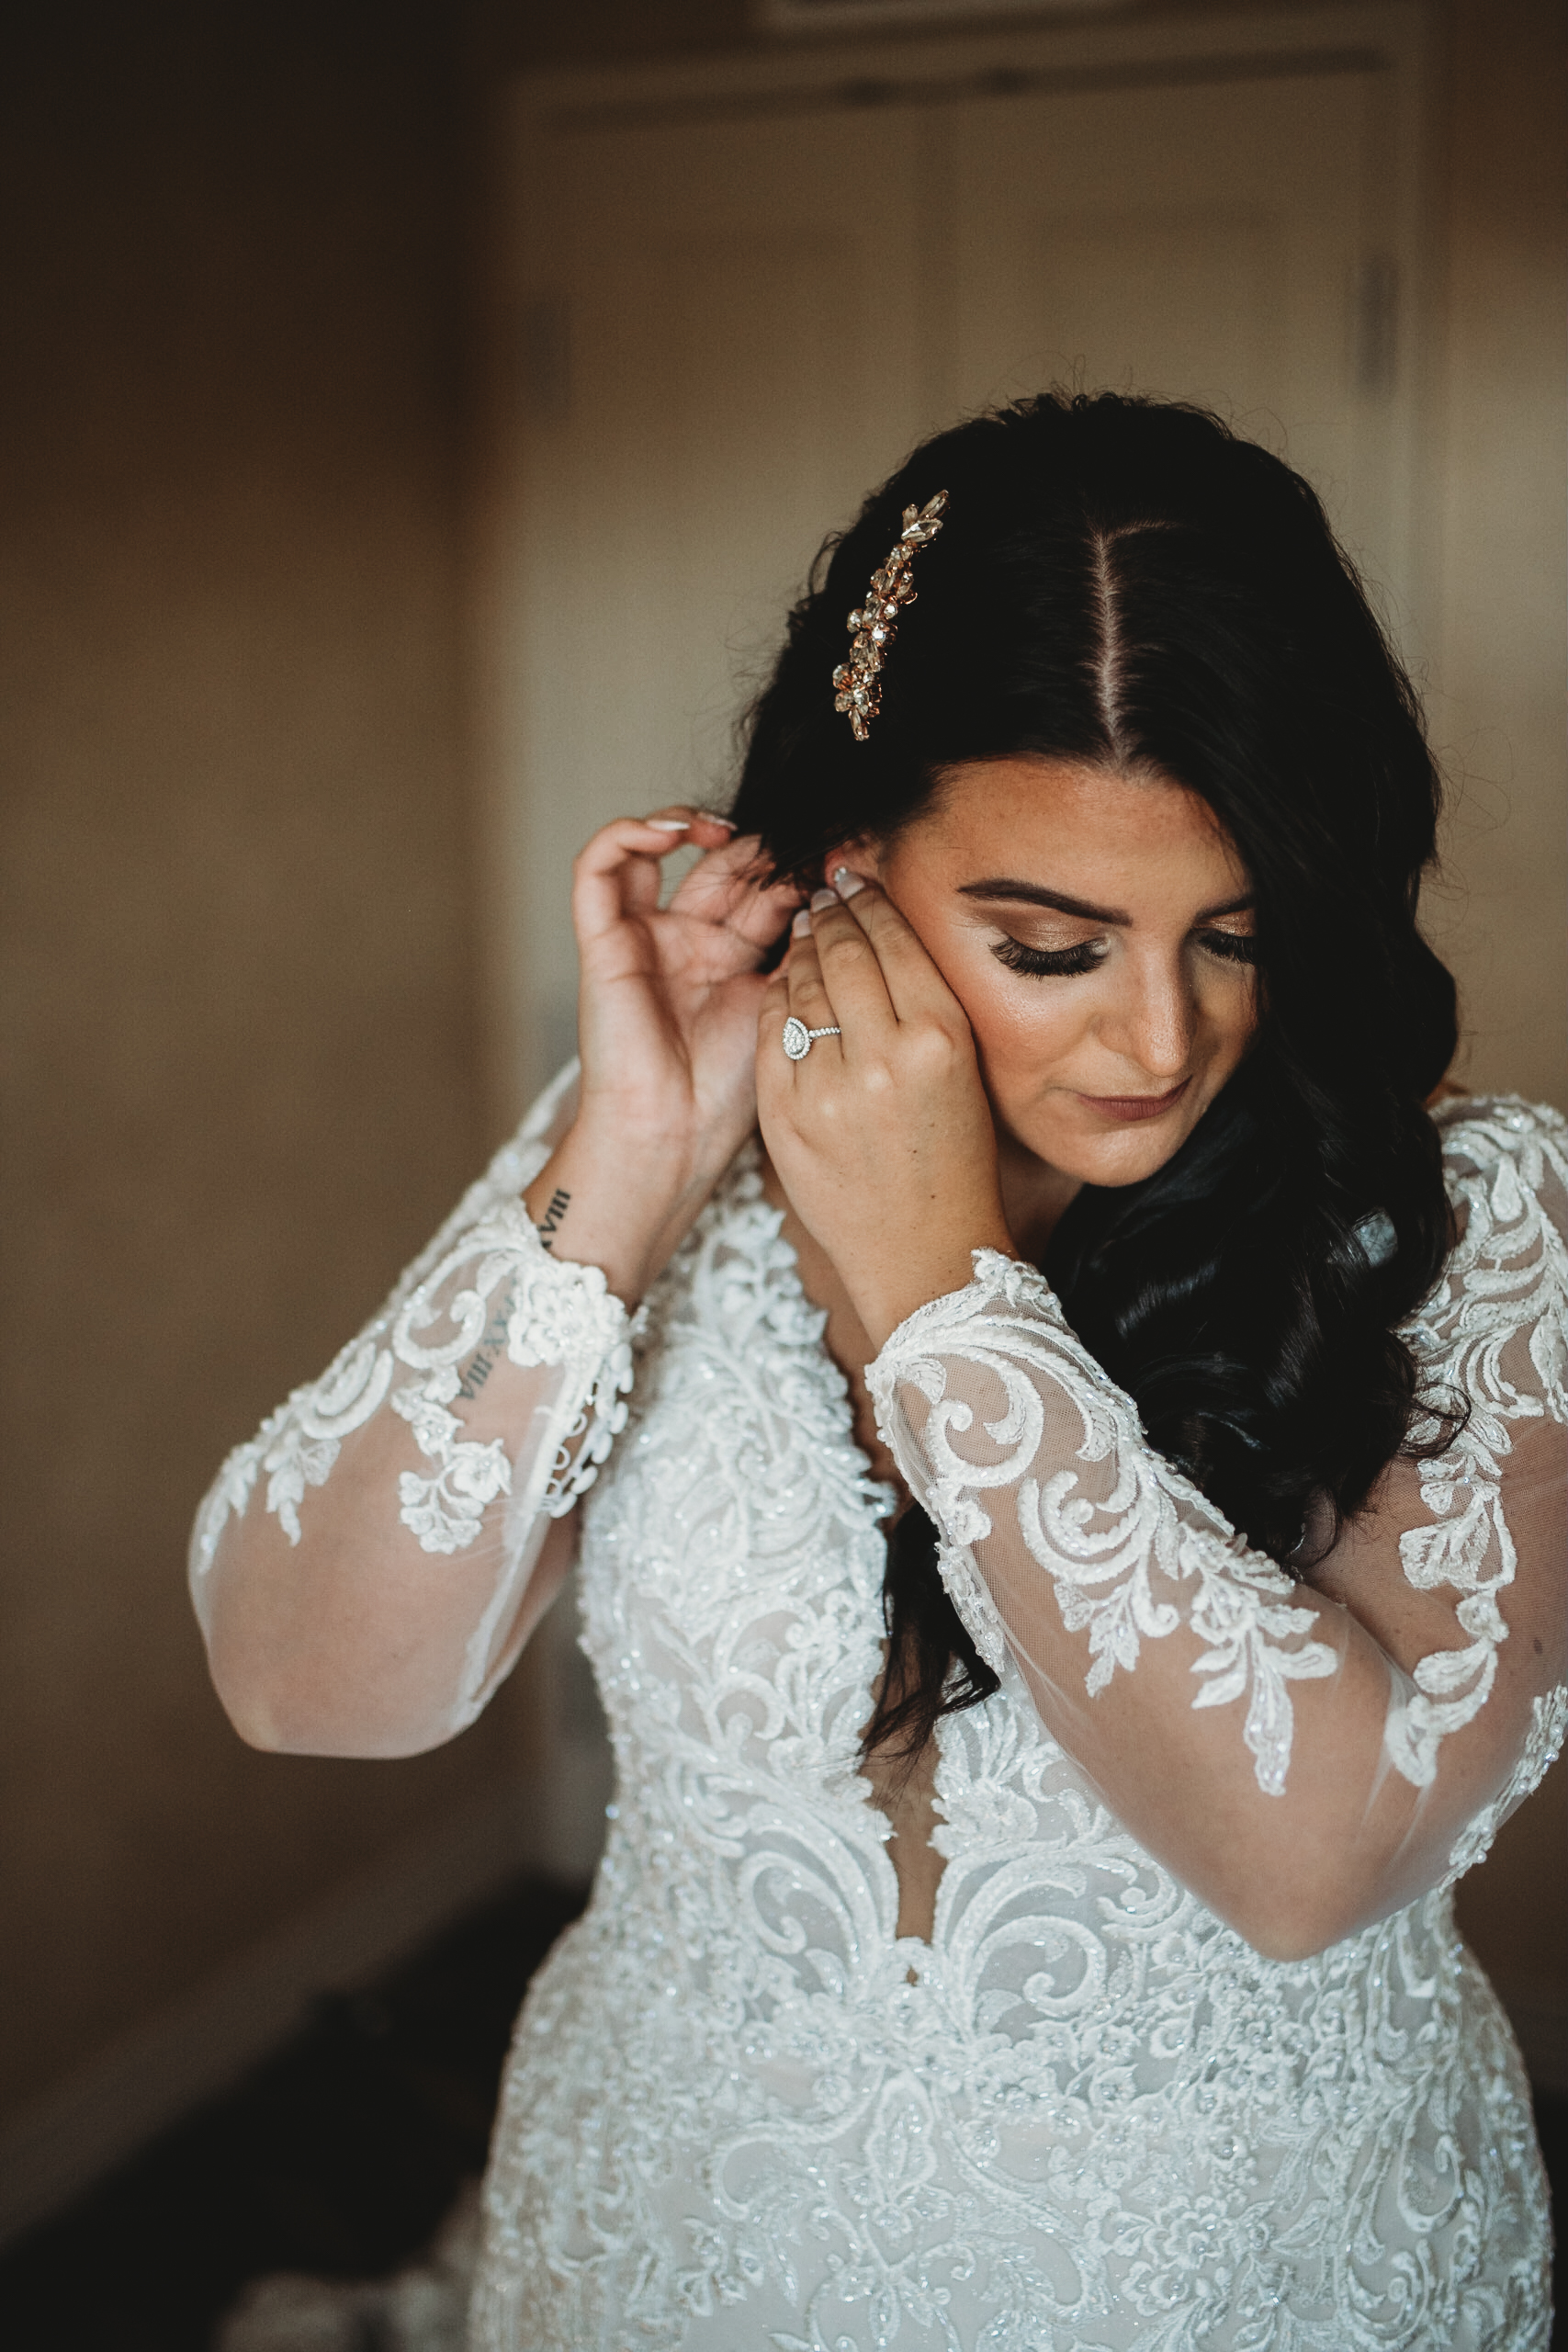 Sparkly Wedding Dresses for New Year's Eve | Maggie Sottero